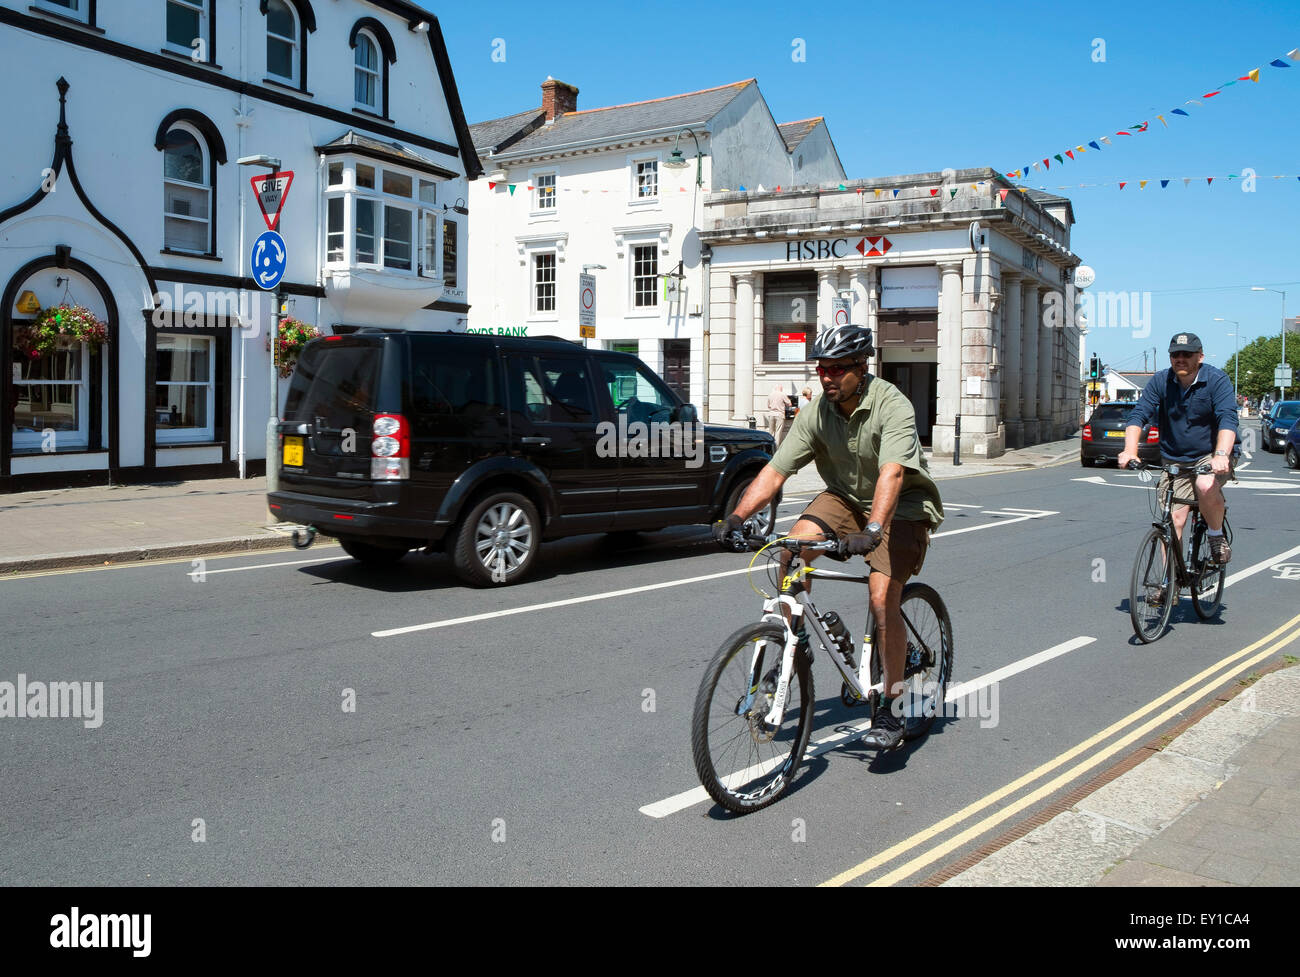 Cyclists in the town of Wadebridge, Cornwall, Uk after using the Camel Trail cycle route Stock Photo